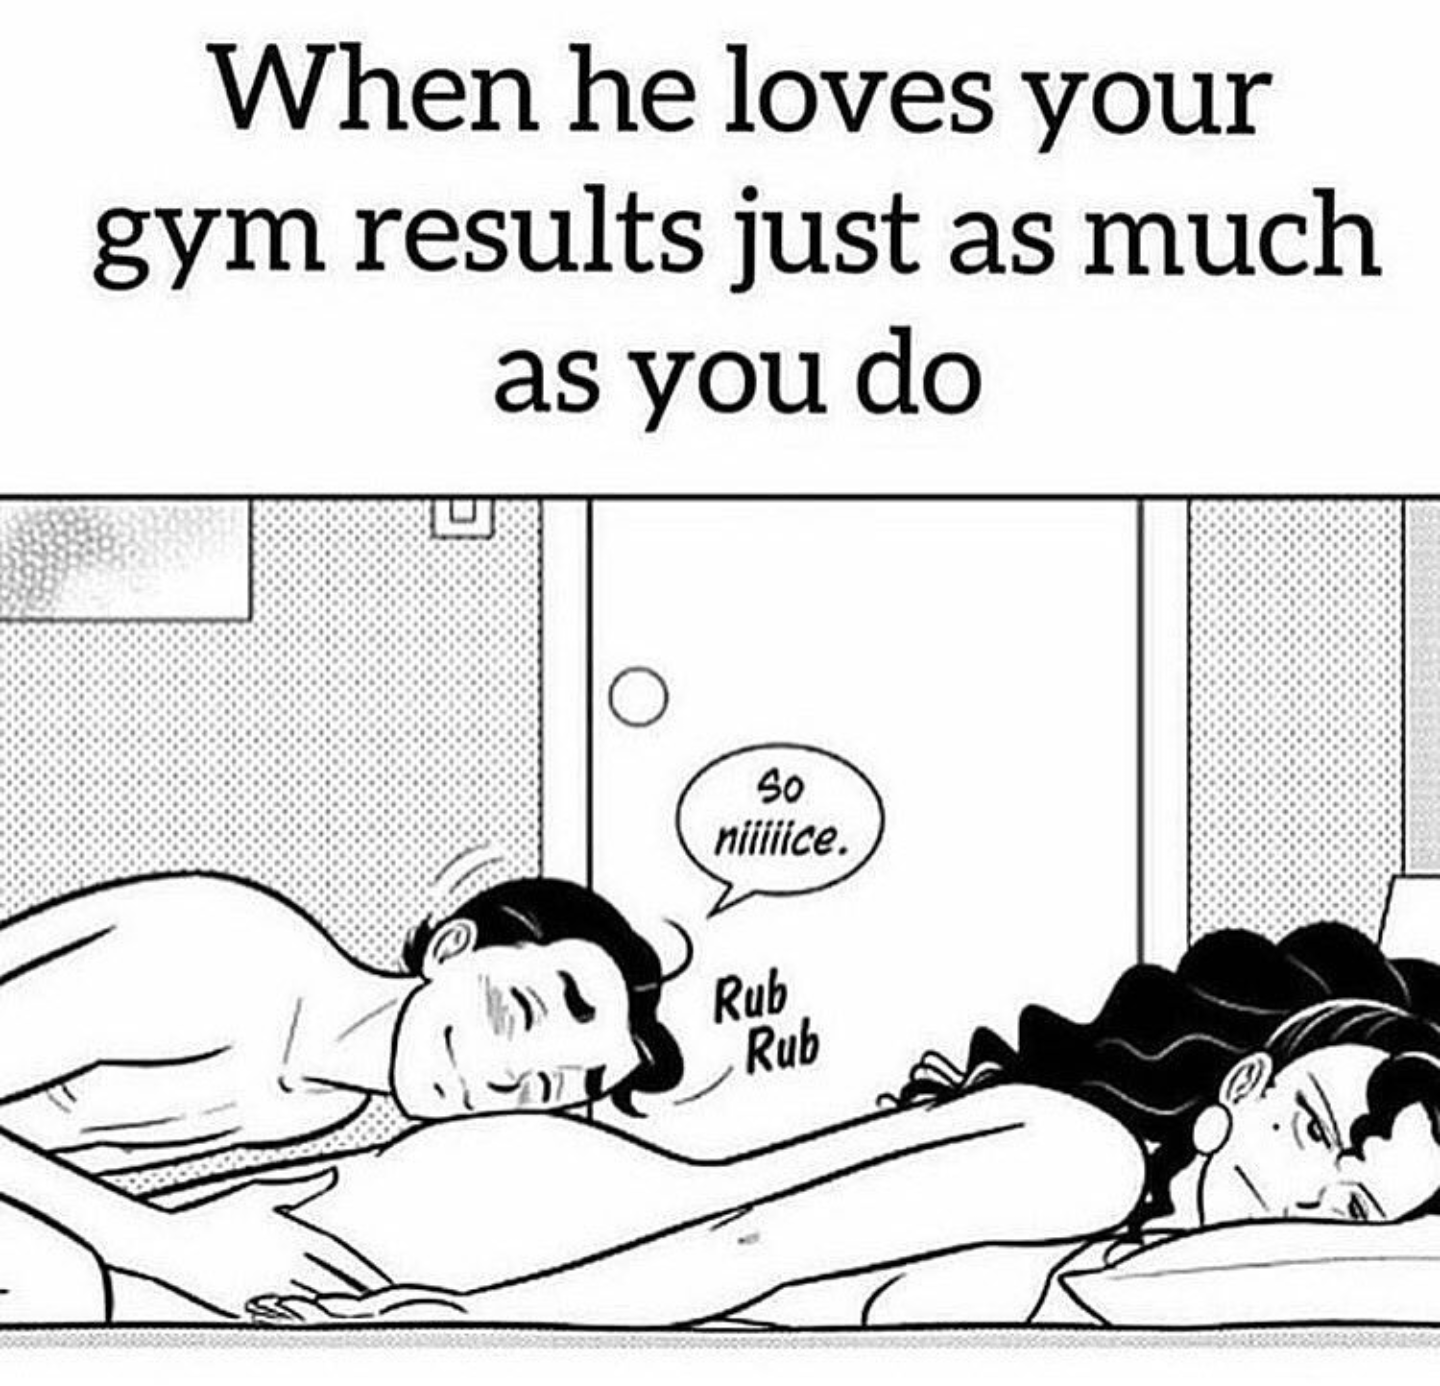 butt pillow meme - When he loves your gym results just as much as you do Mae Rub U S Rebel Rub